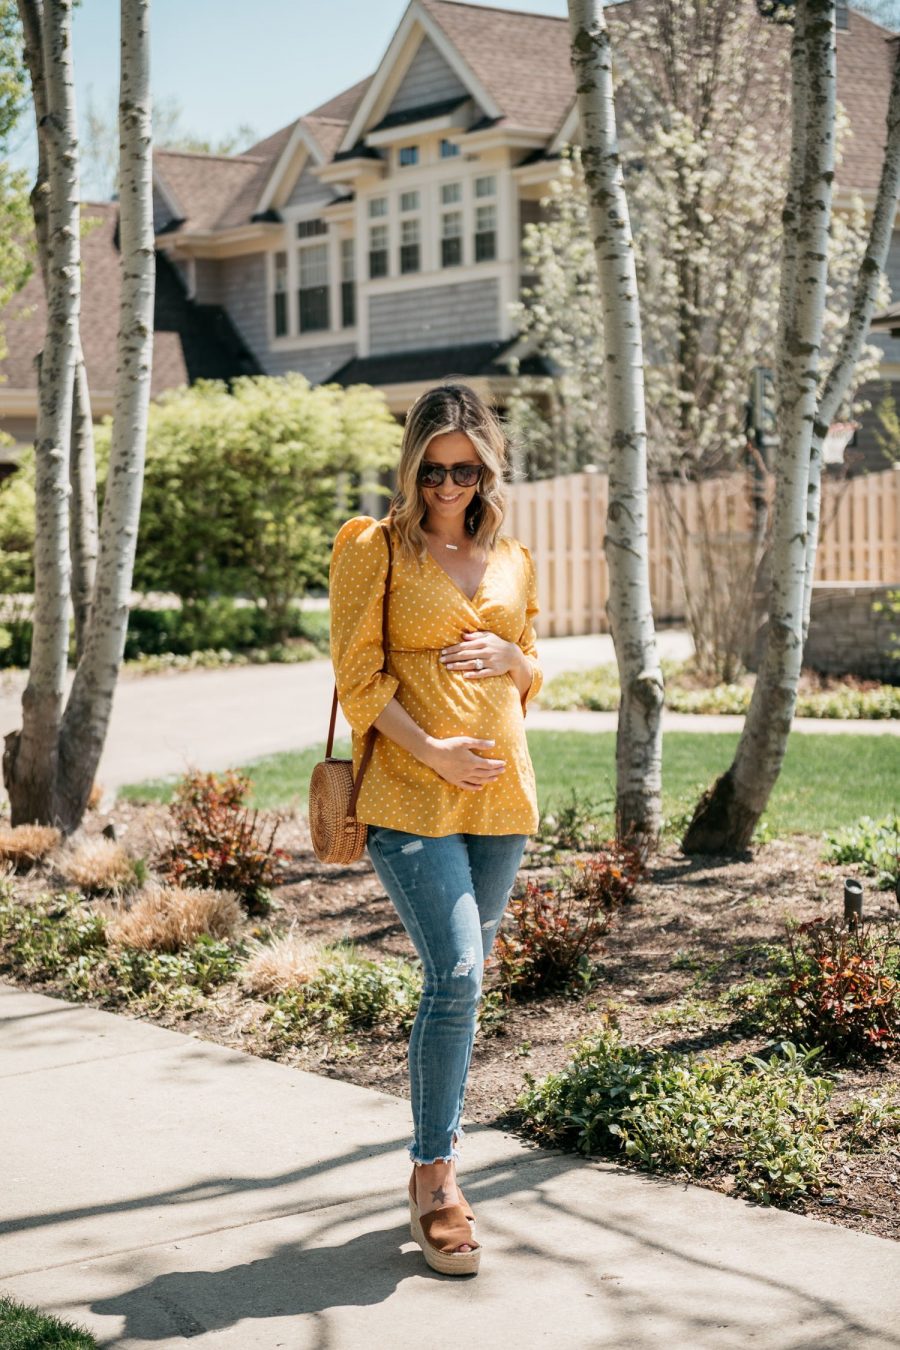 The Color Of The Summer: Golden Yellow
The perfect yellow maternity top, jeans, and espadrille wedges